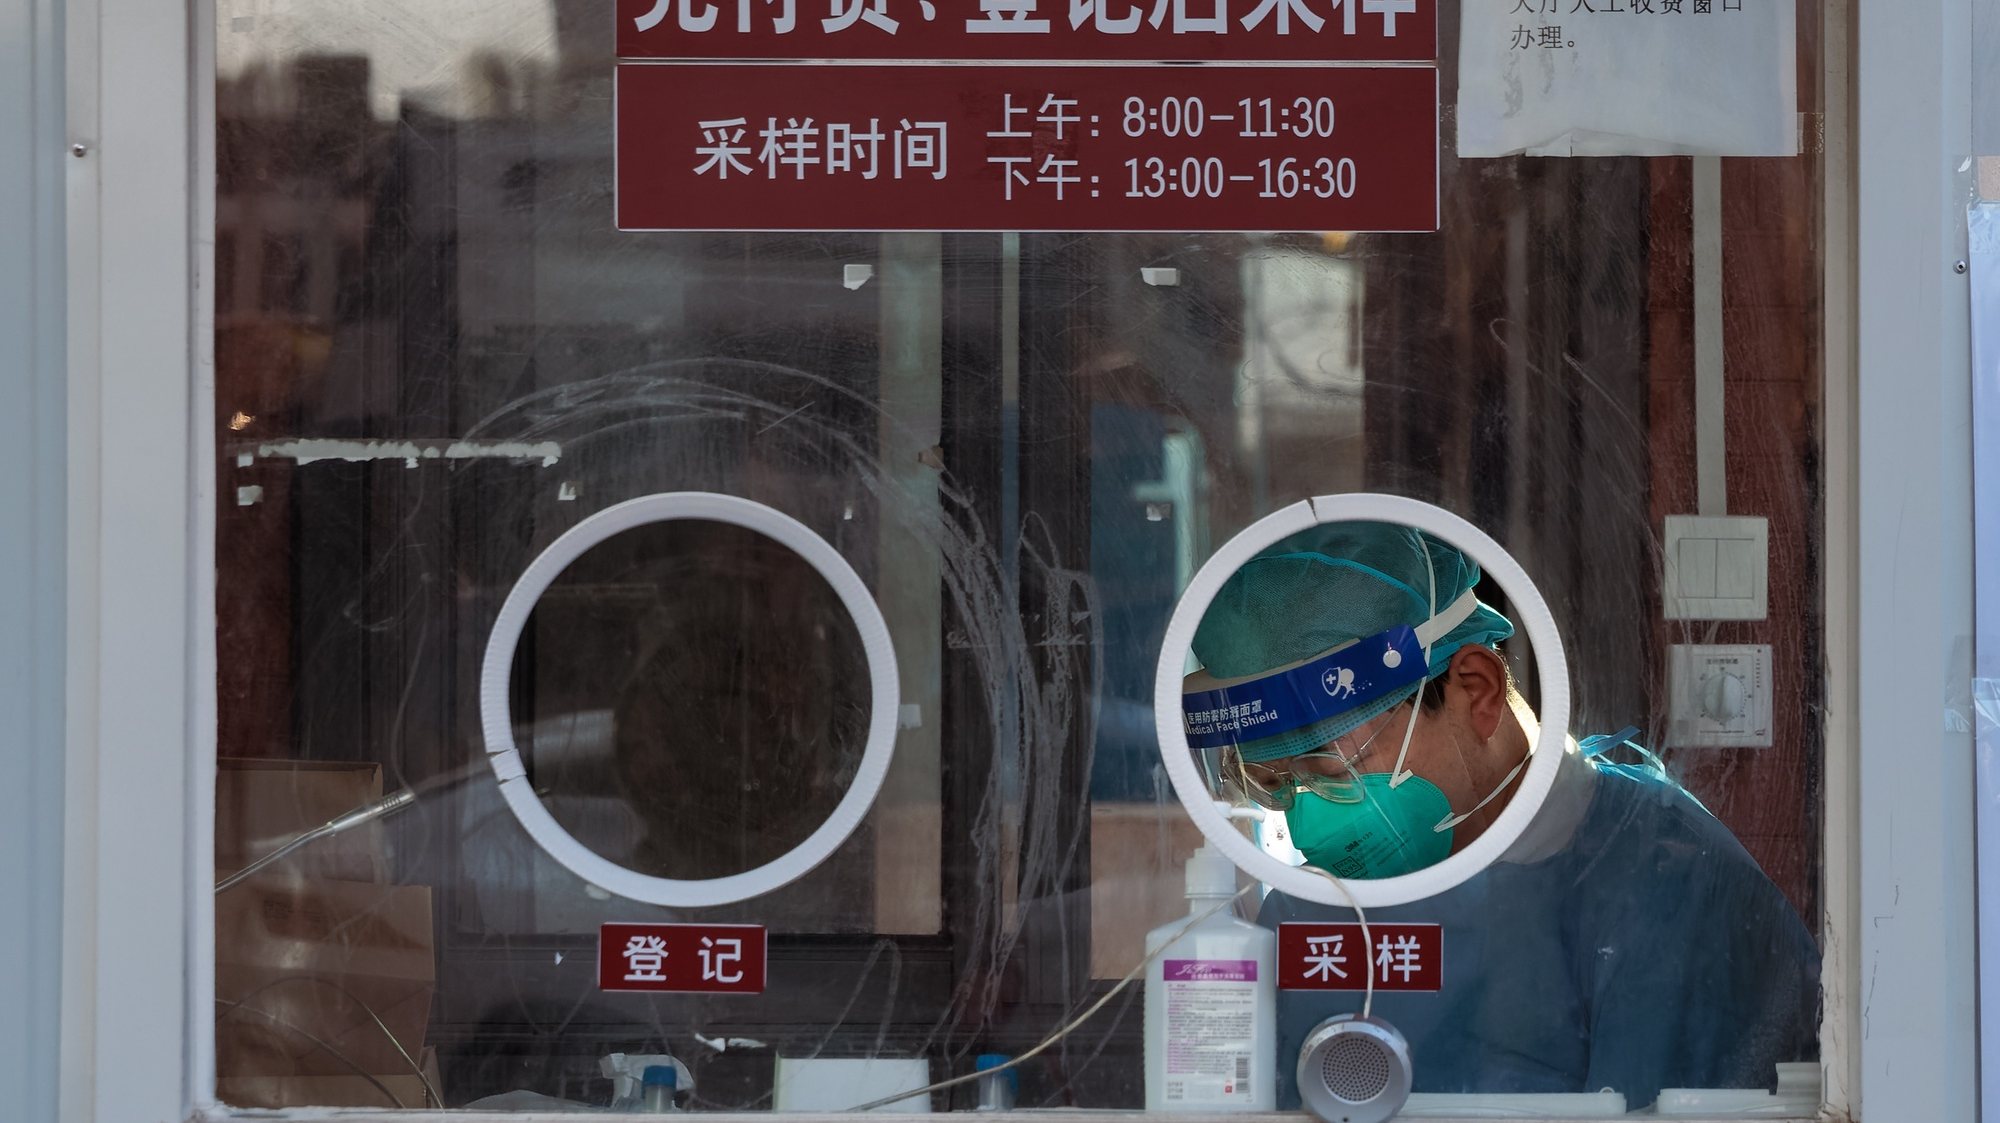 epa10440822 A health worker sits inside a PCR testing booth in Shanghai, China, 31 January 2023. China’s health authorities reported on 30 January that the COVID-19 pandemic in the country was at a ‘low level’. According to the Chinese Center for Disease Control and Prevention, the current wave of infections is coming to an end.  EPA/ALEX PLAVEVSKI